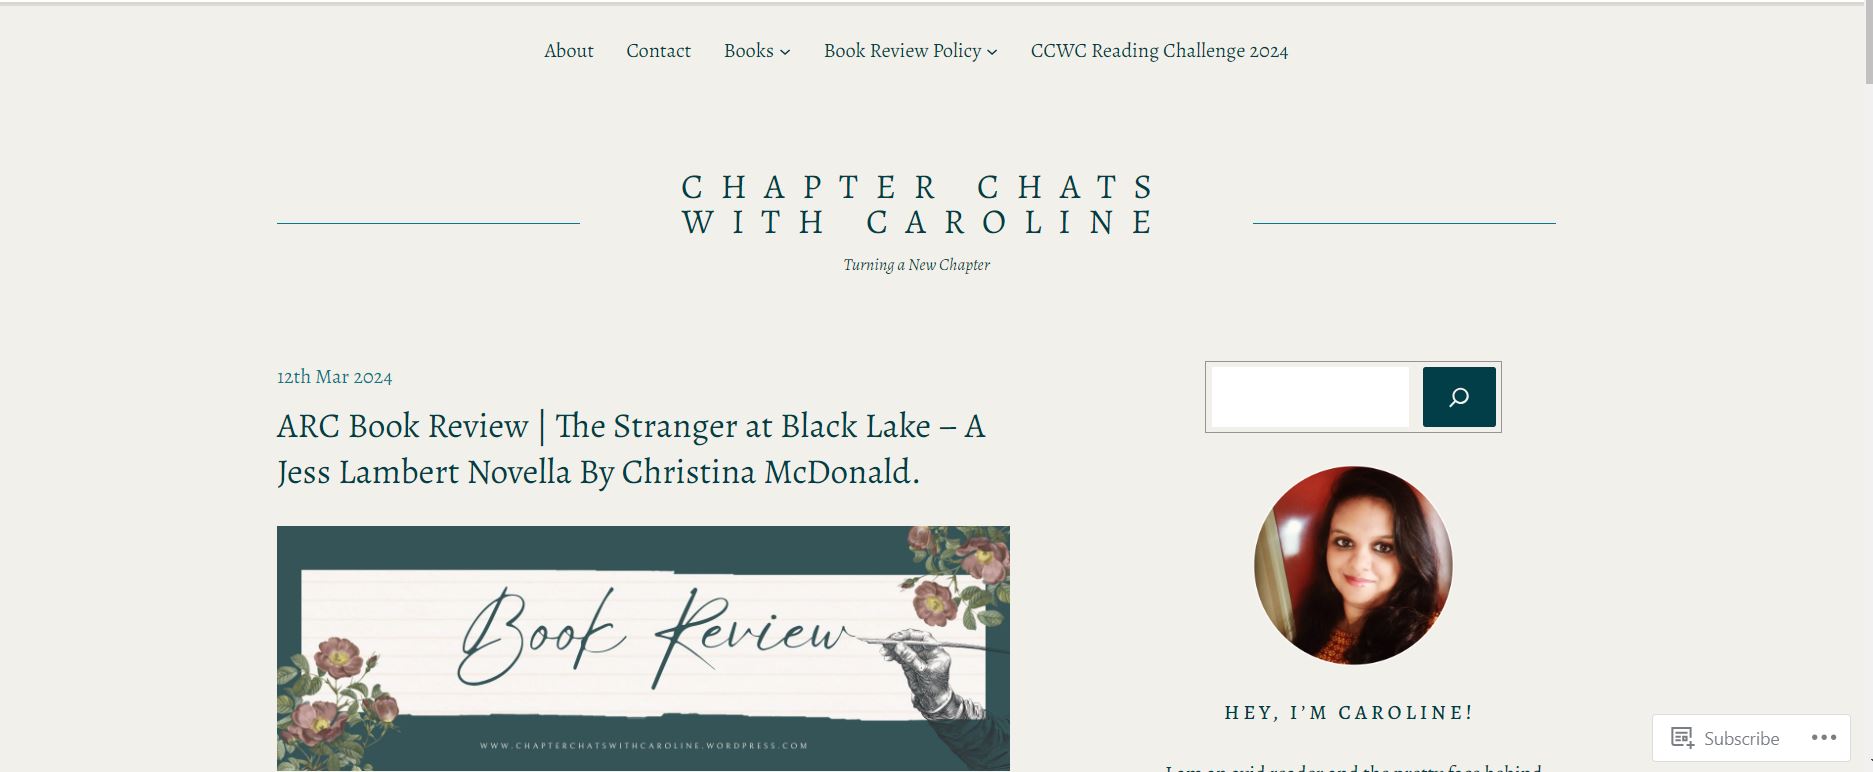 Chapter Chats With Caroline